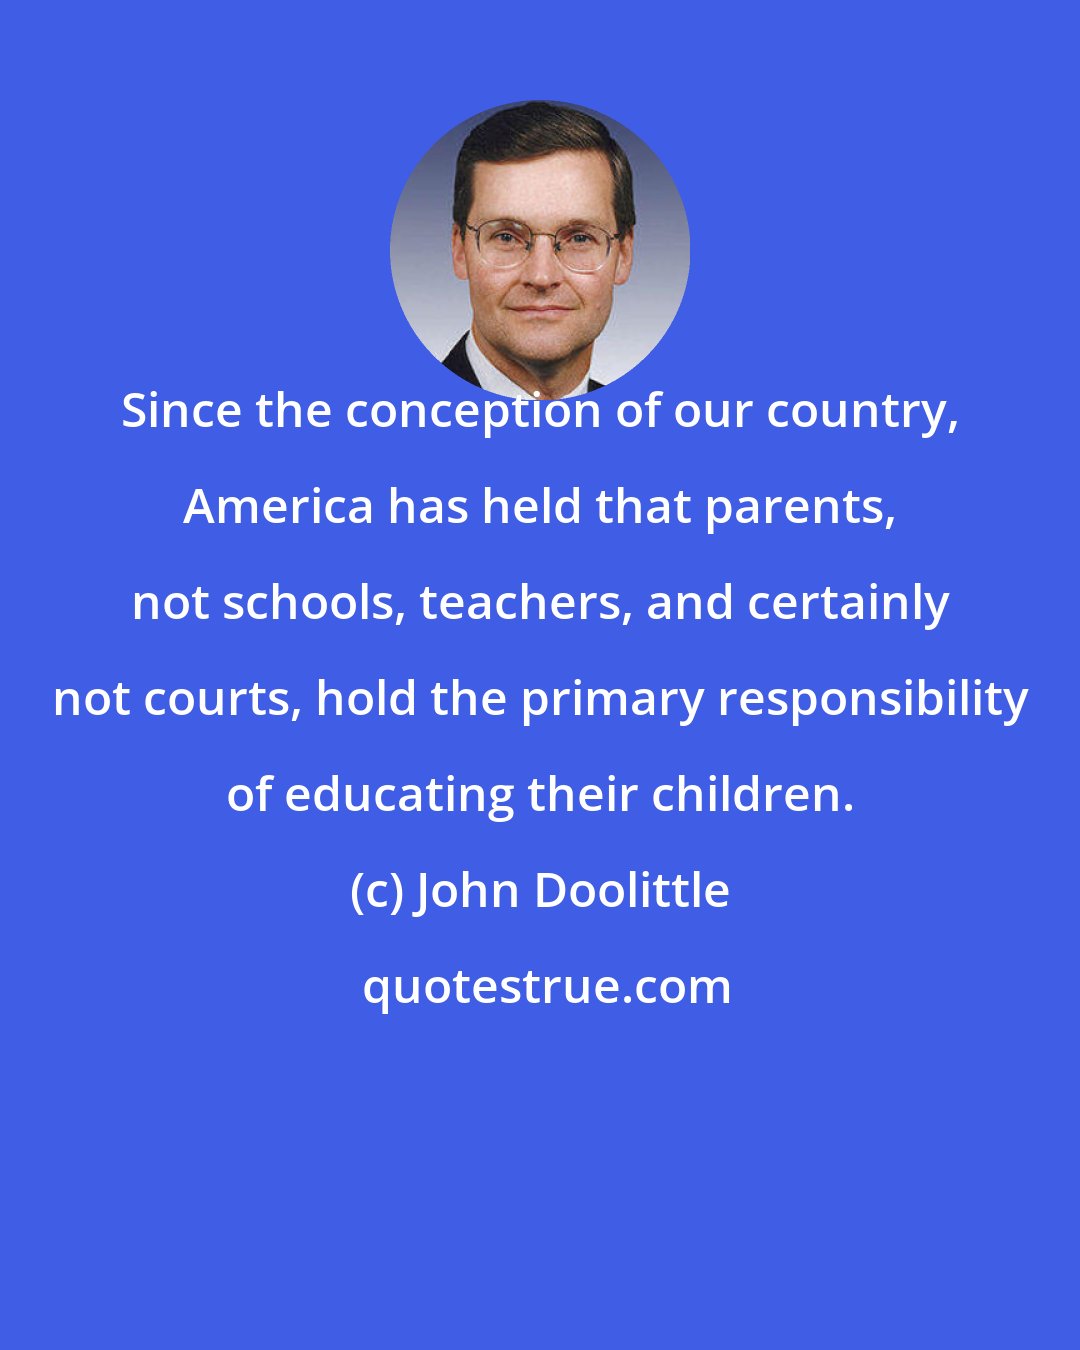 John Doolittle: Since the conception of our country, America has held that parents, not schools, teachers, and certainly not courts, hold the primary responsibility of educating their children.